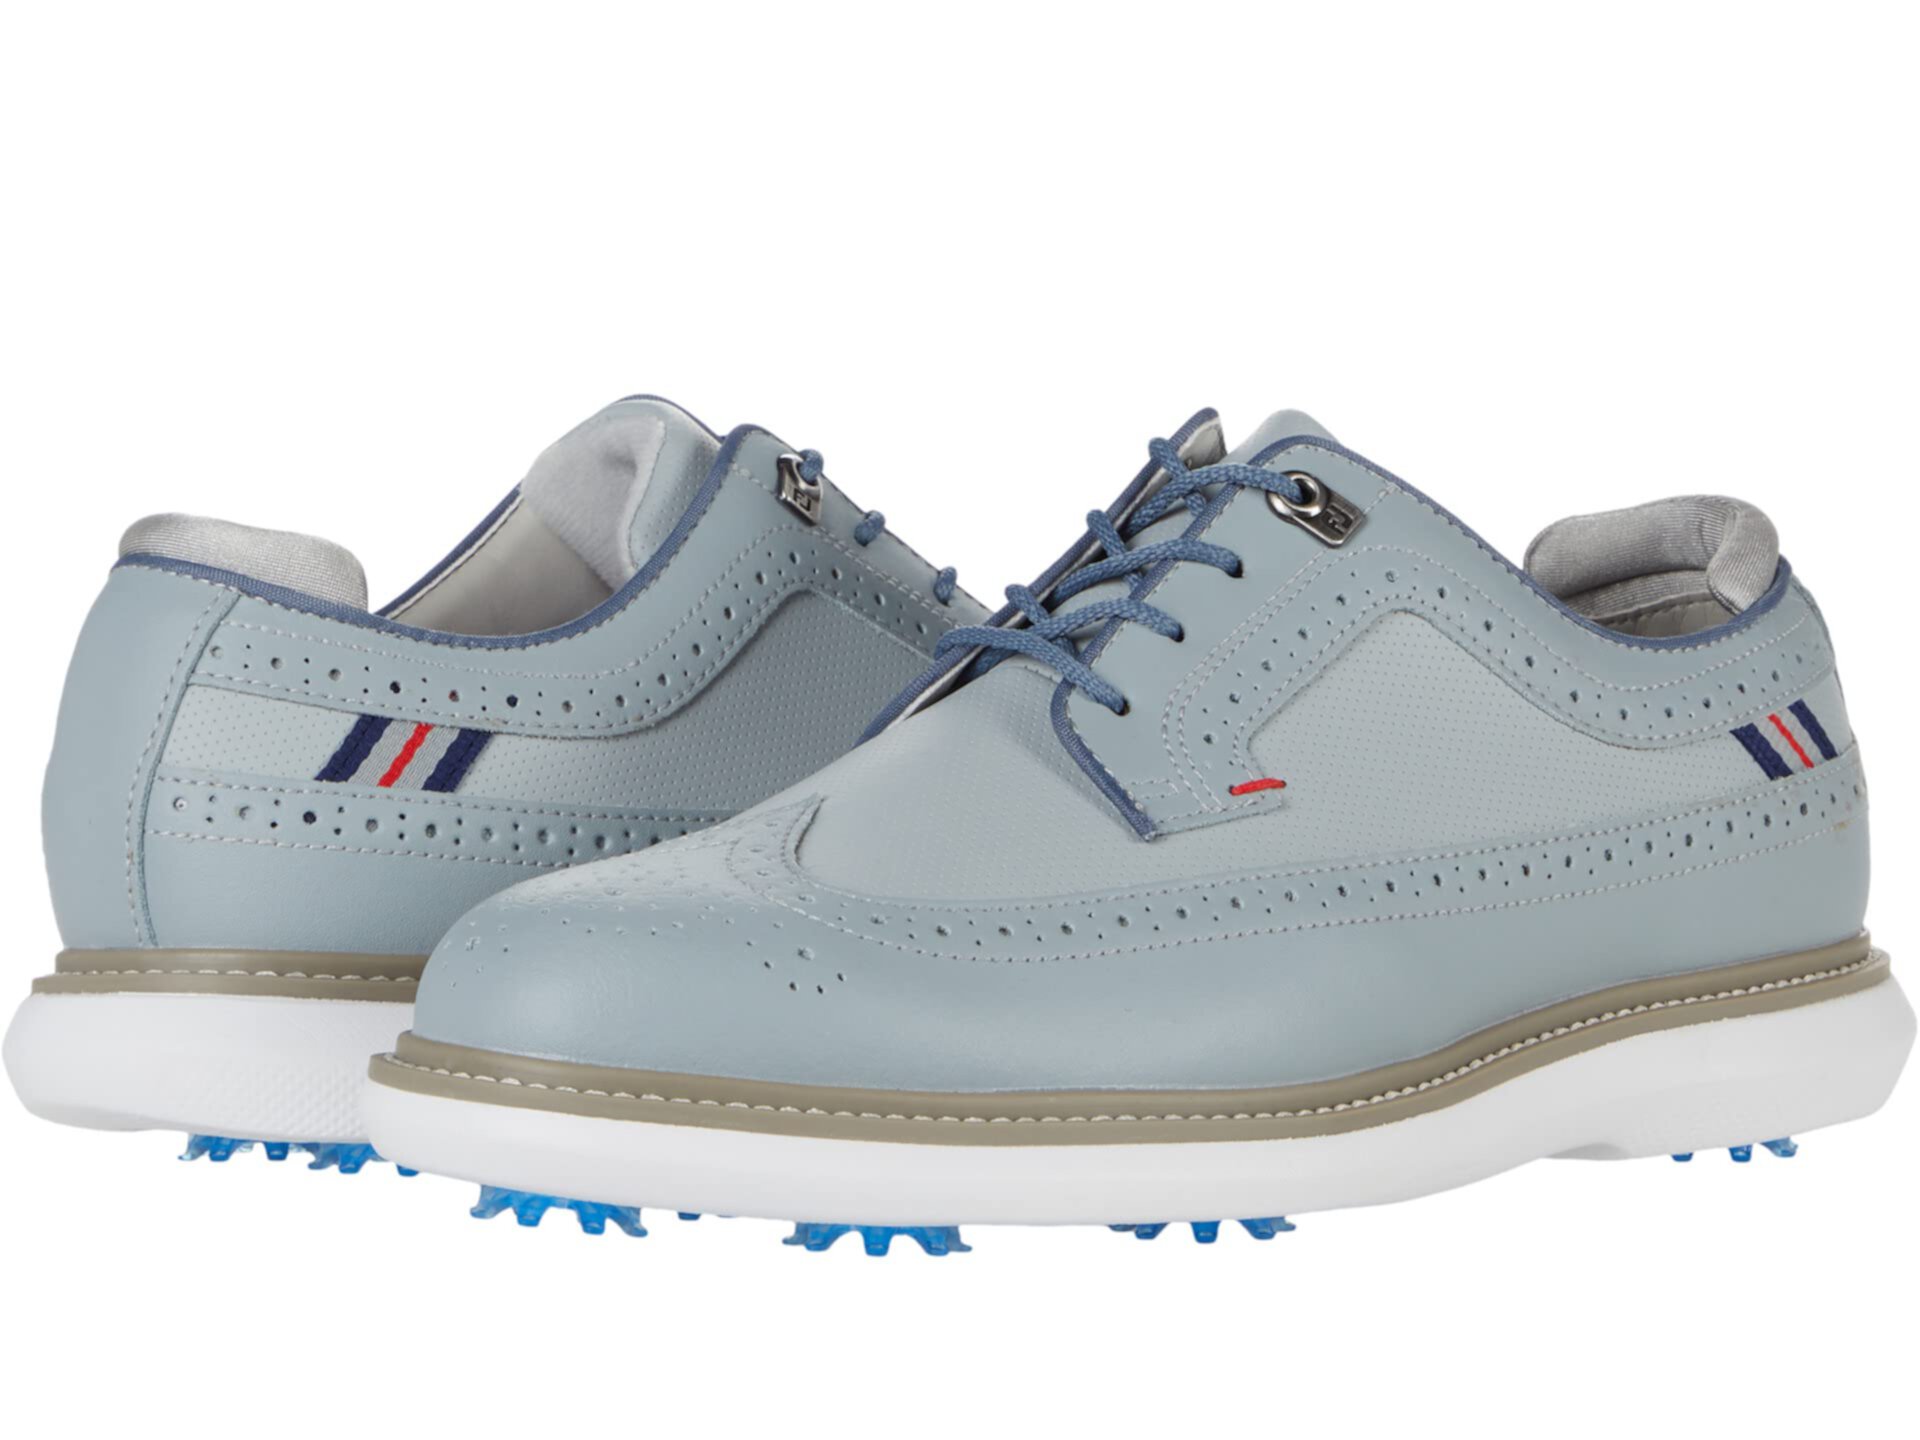 Traditions Wing Tip Golf Shoes - Previous Season Style FootJoy